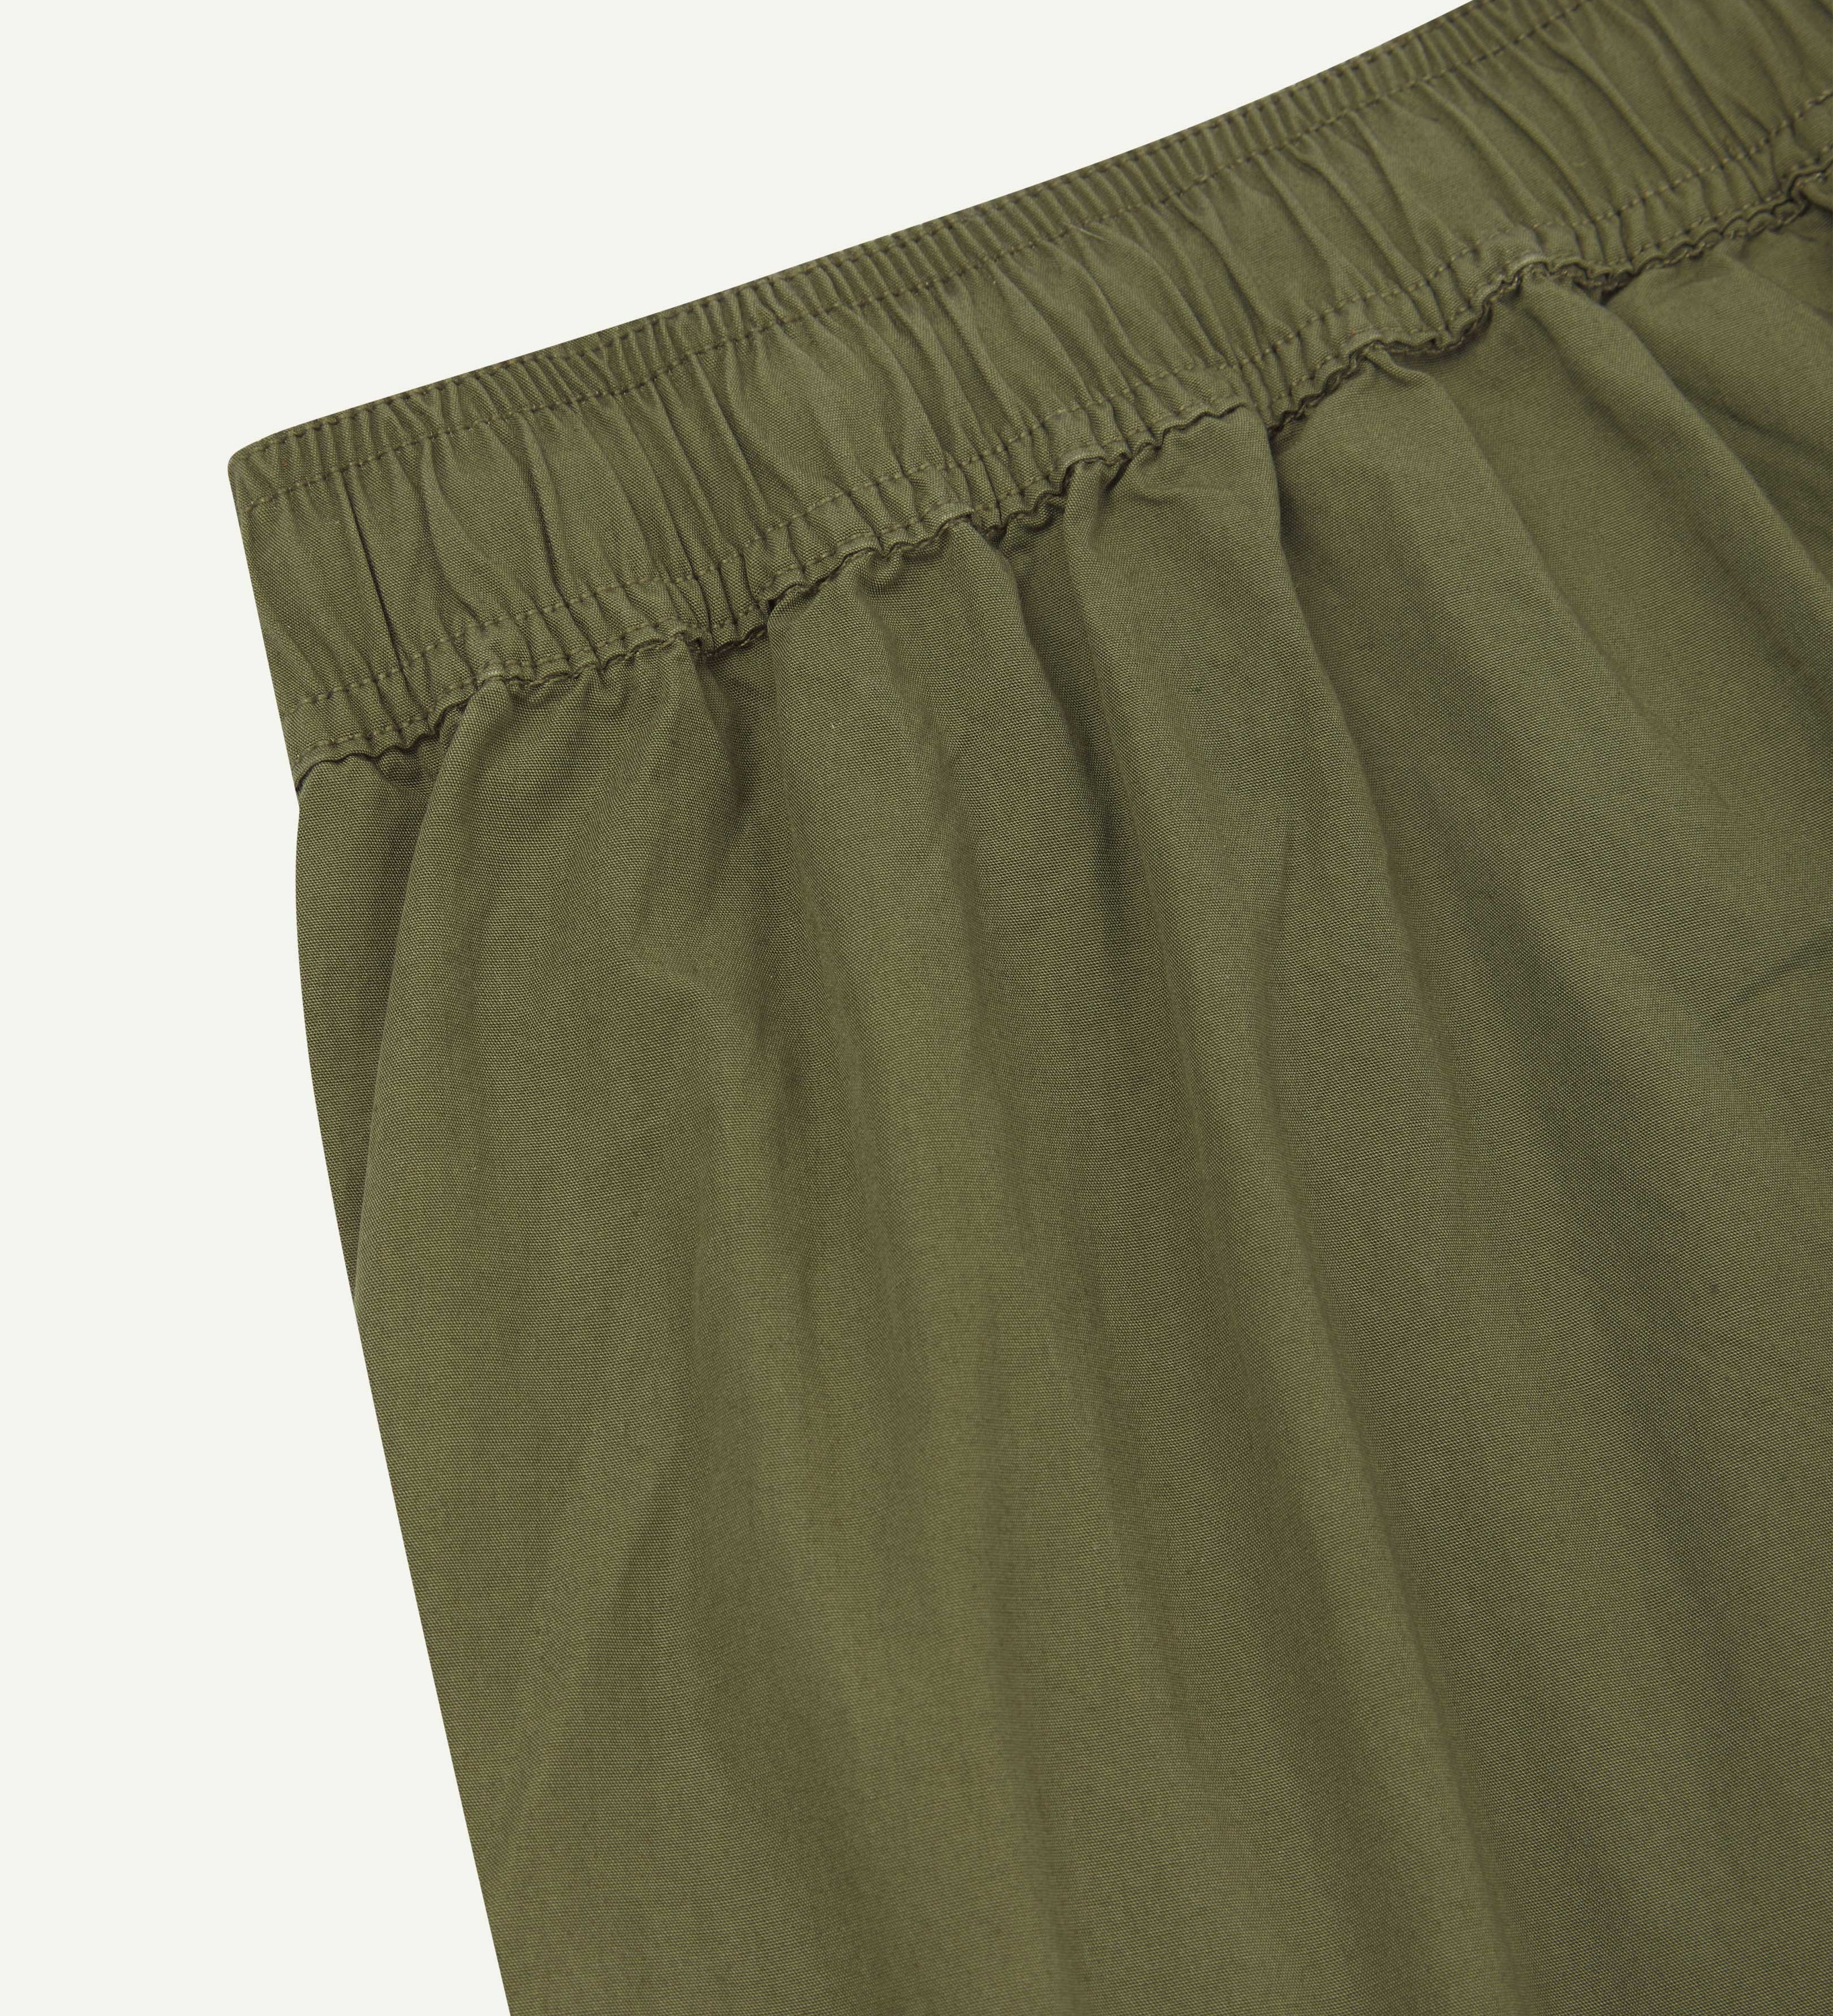 Close up detailed shot of Uskees 5020 olive lightweight utility pants showing elasticated waist